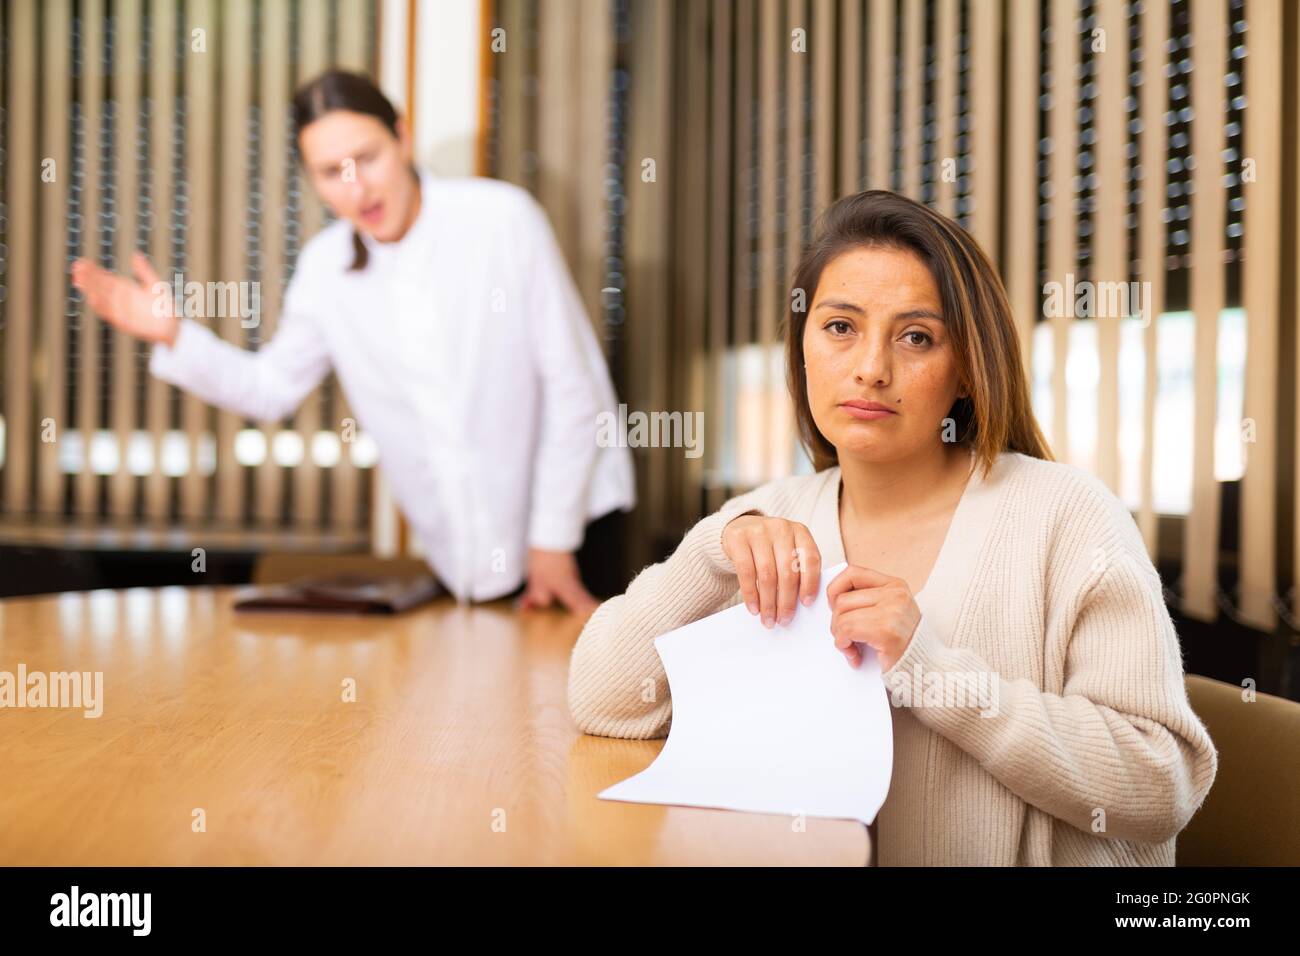 Unhappy woman standing in office after reprimand from chief Stock Photo